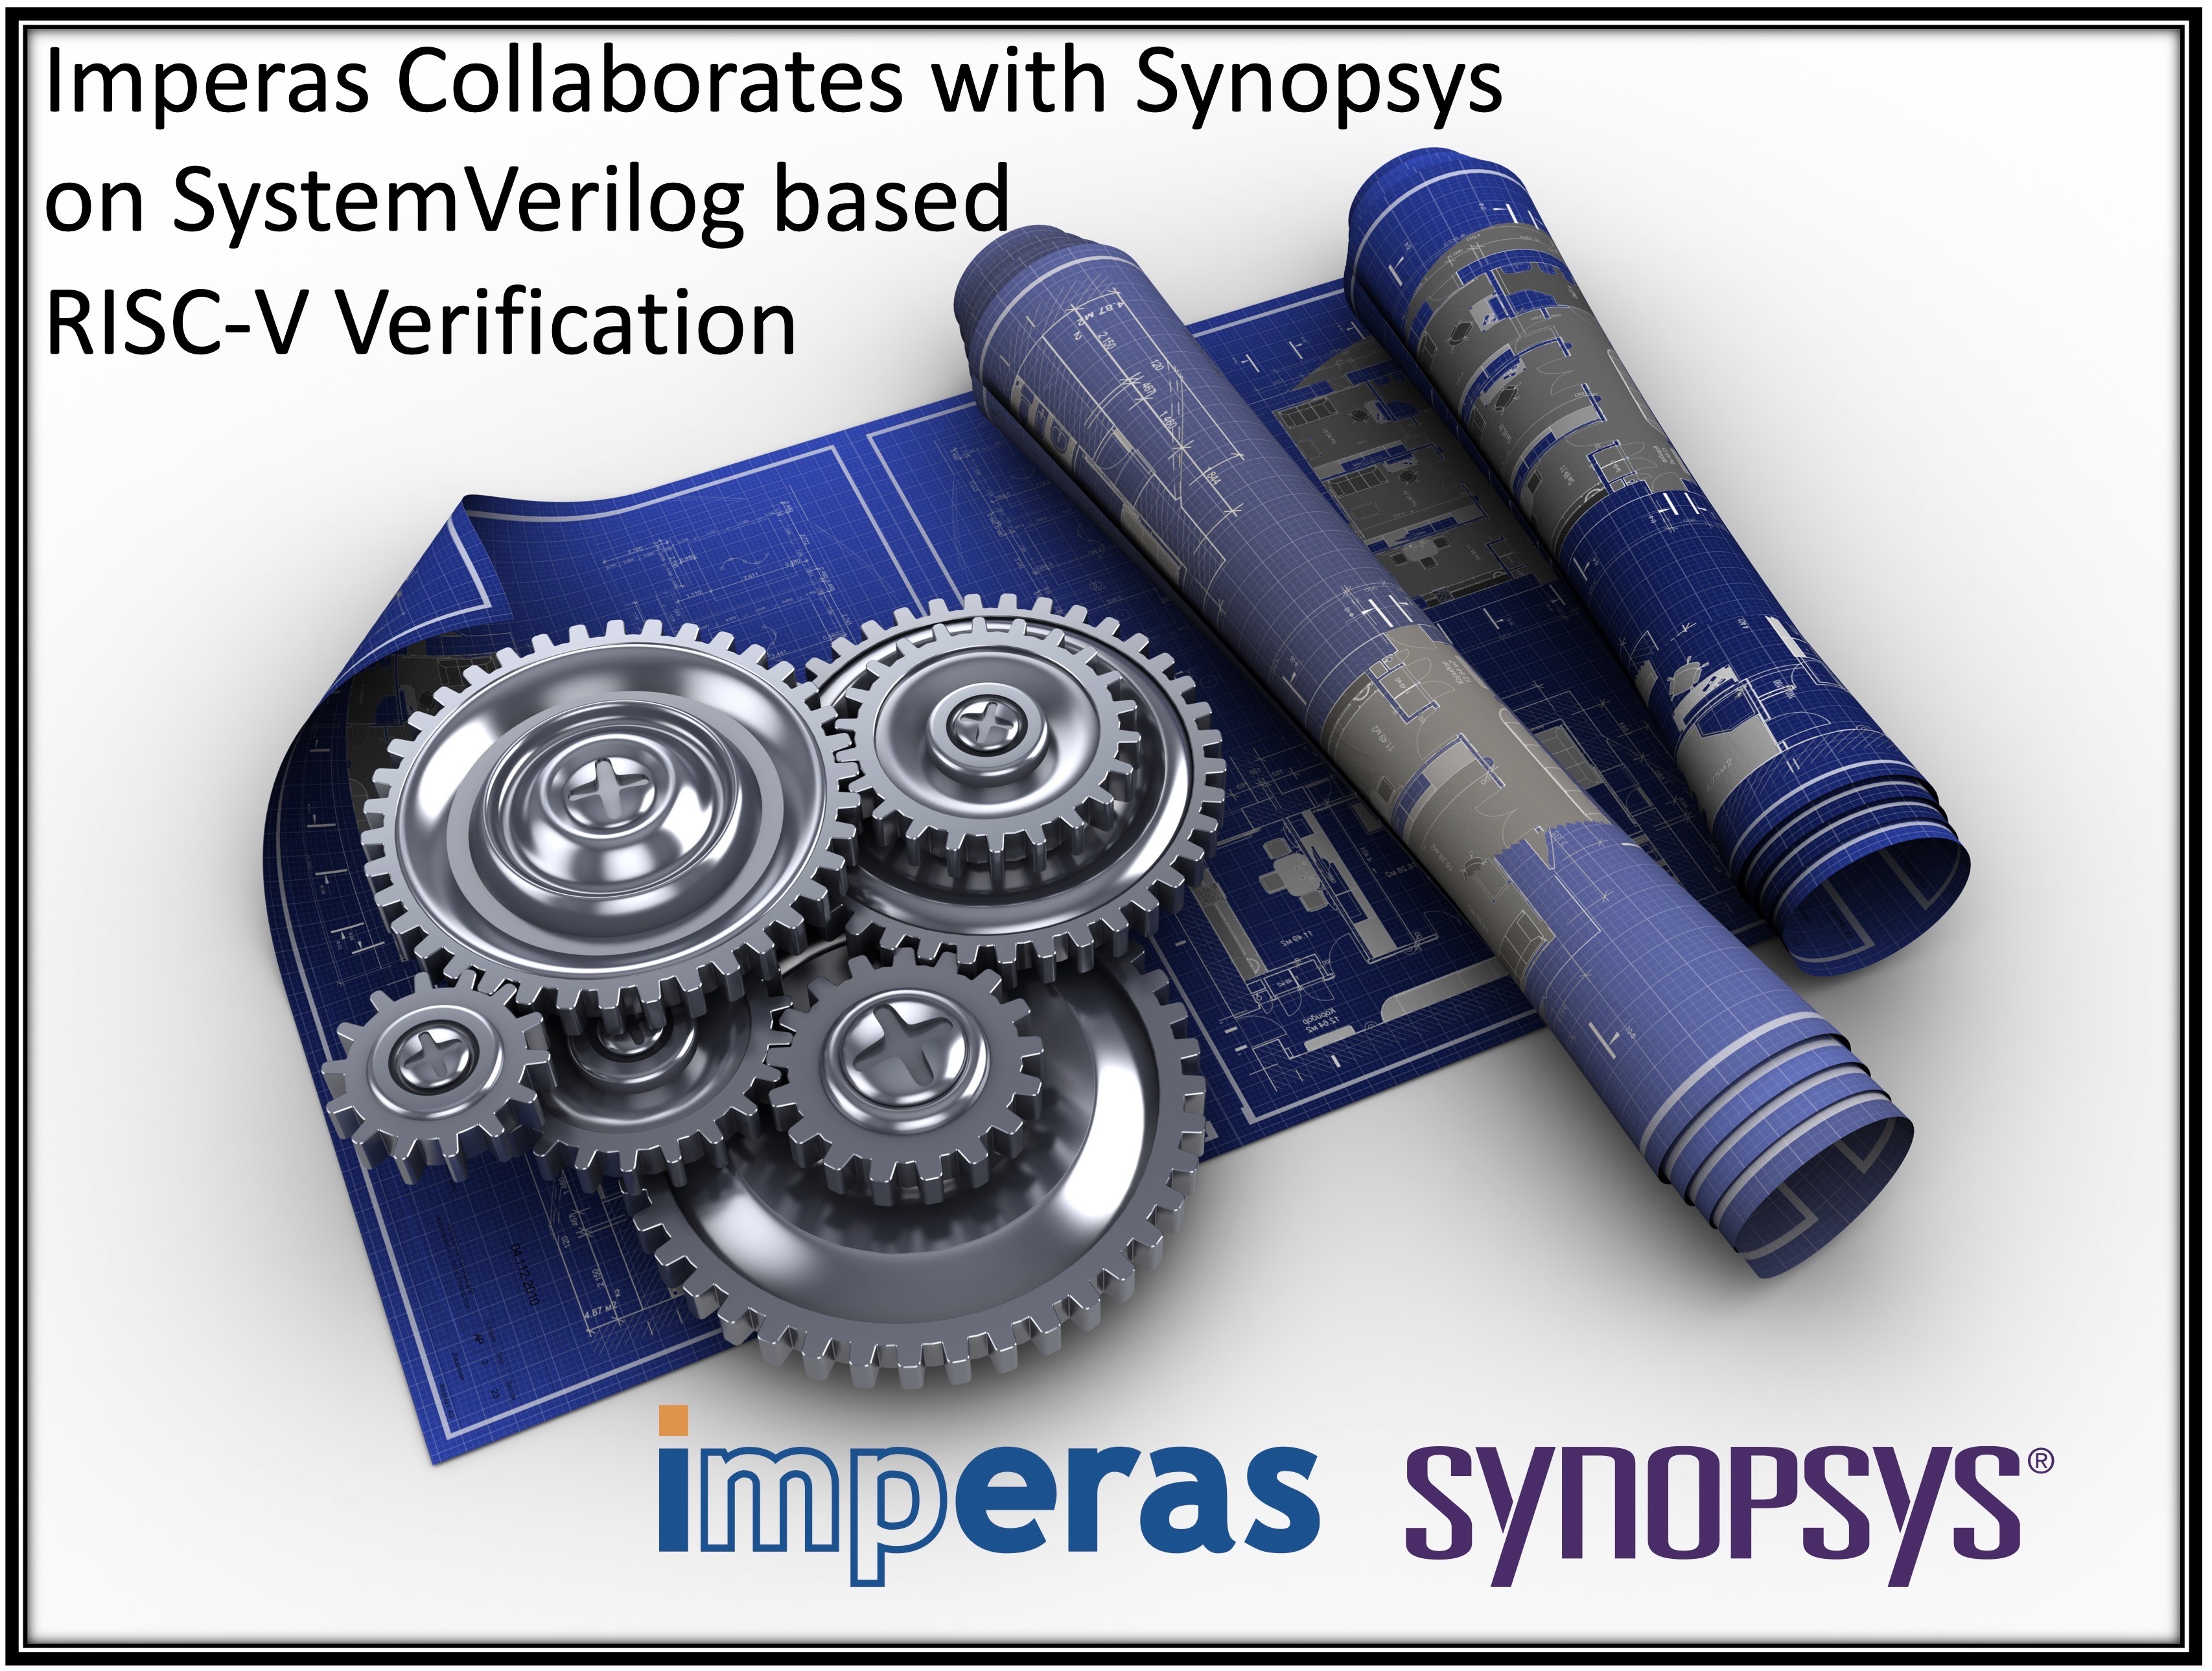 Imperas Collaborates with Synopsys on SystemVerilog based RISC-V Verification